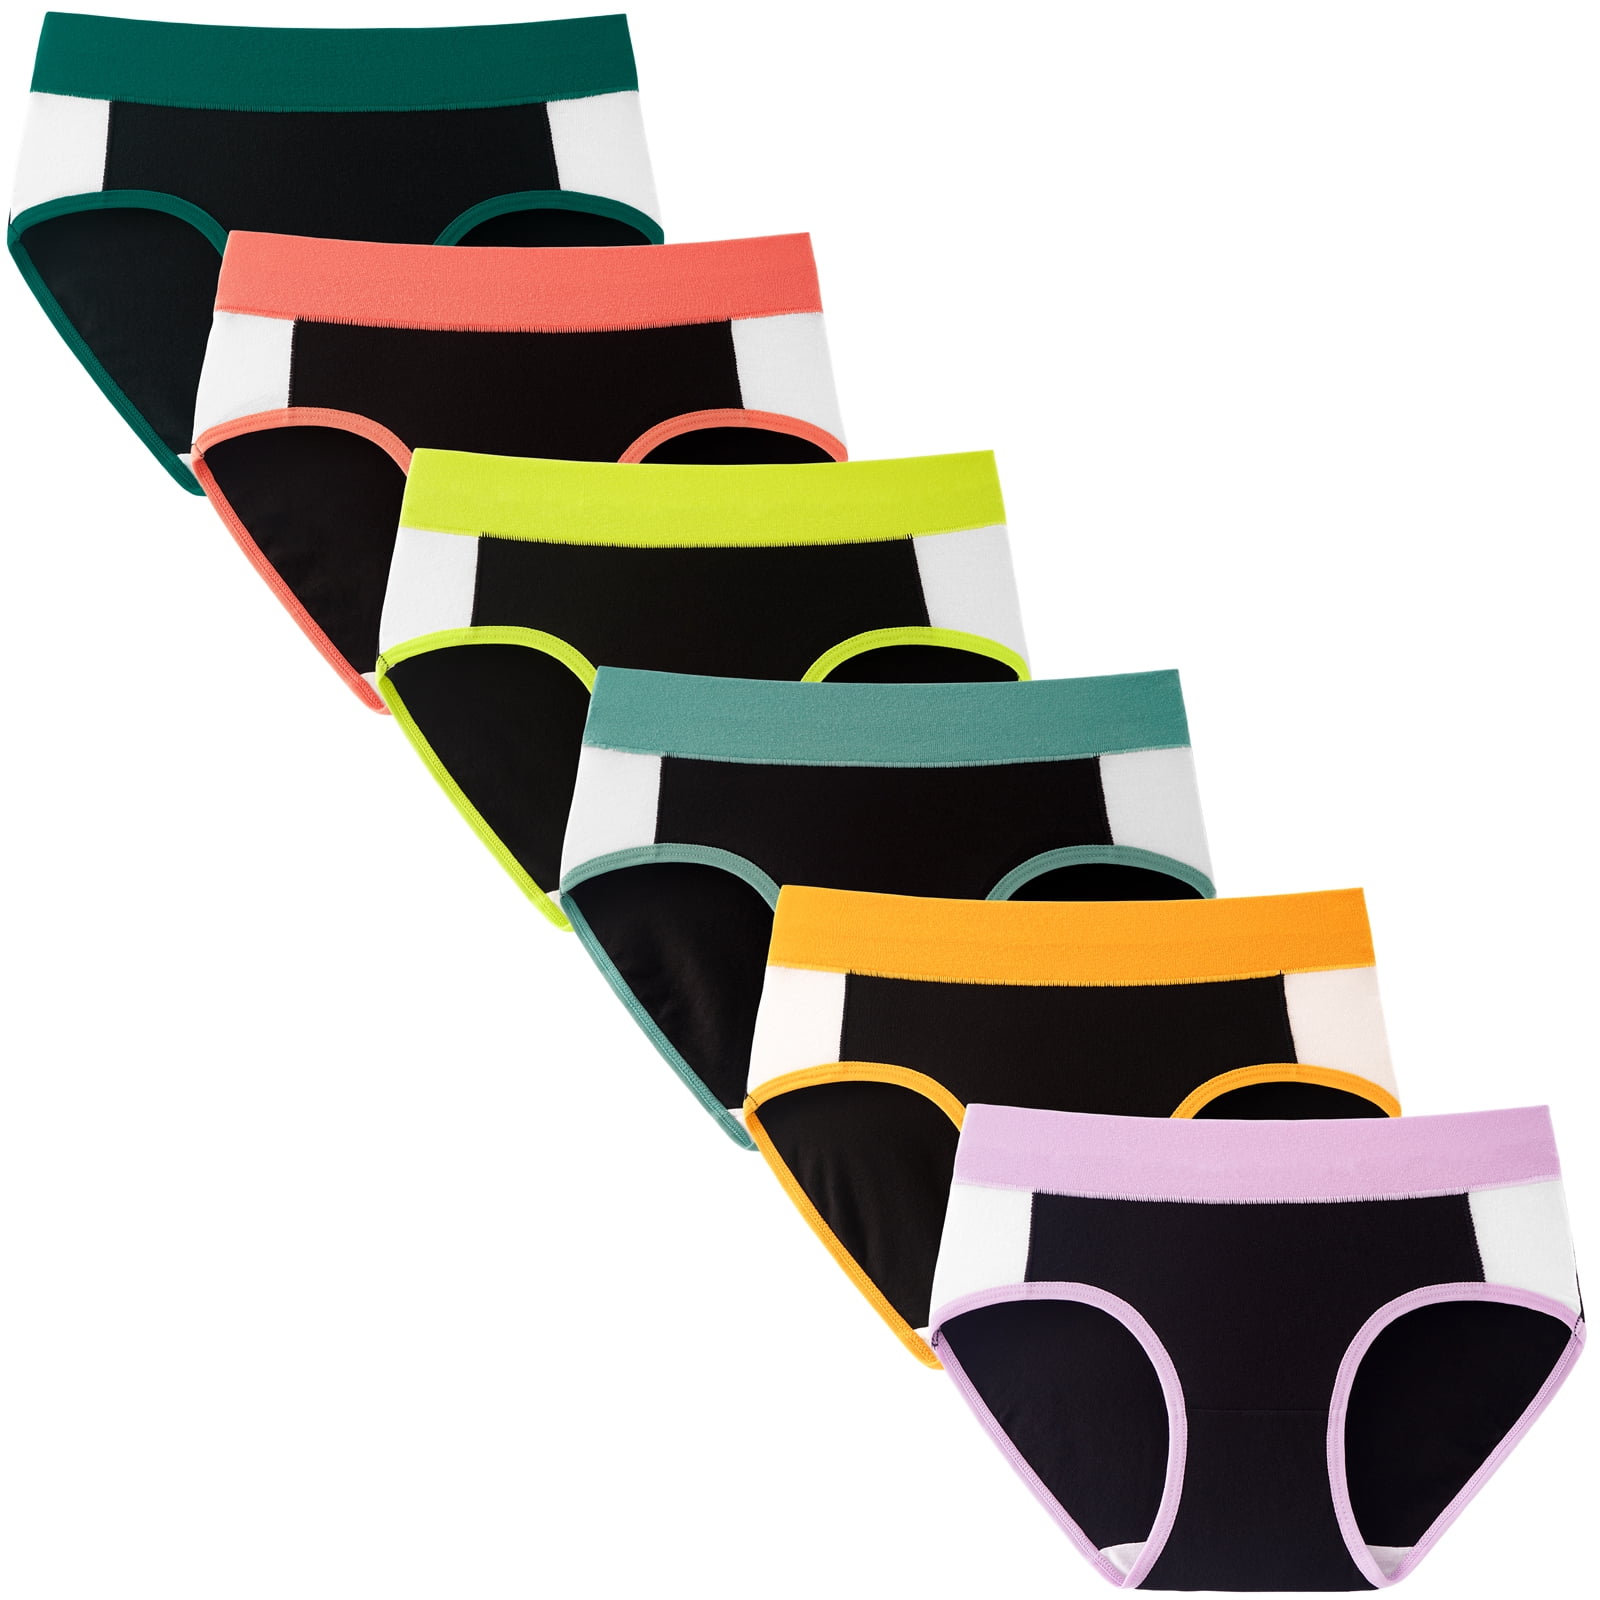 INNERSY Big Girls Panties Soft Cotton Briefs Mid-Waisted Underwear for Teen  Girls 6 Pack (S(8-10 yrs), Black with Colorful Band)